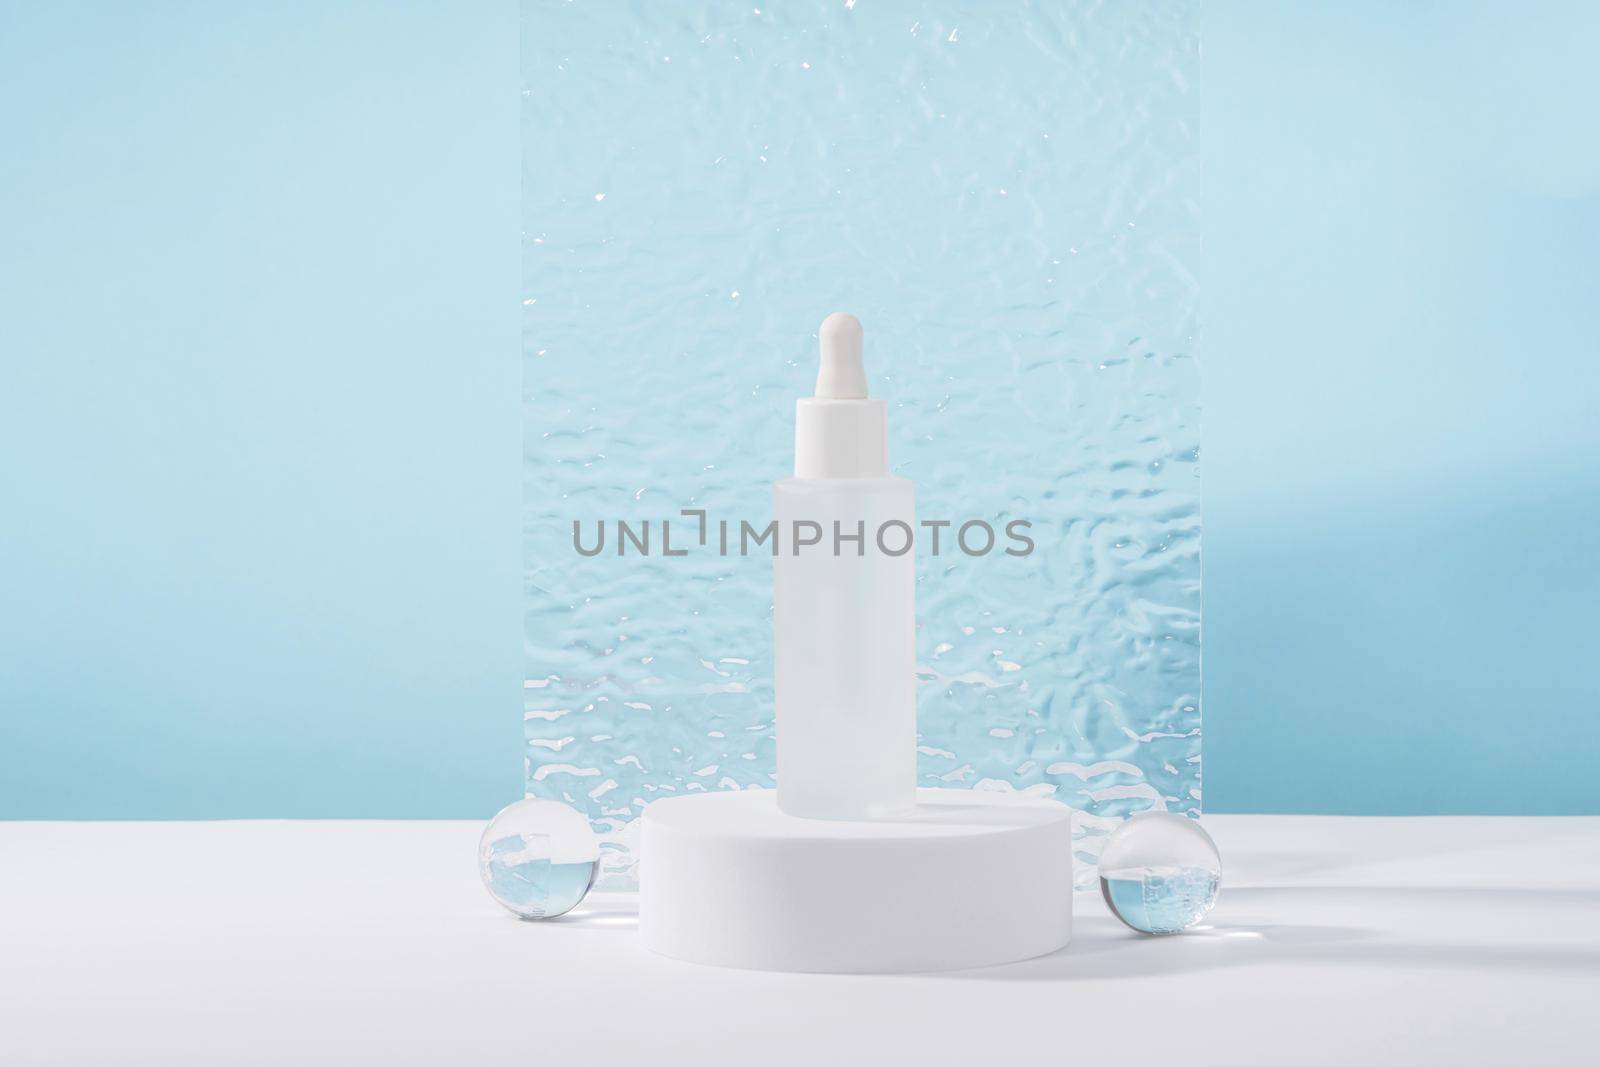 Unbranded cosmetic cream mockup on pedestal podium with stylish props, glass balls and acrylic plate. Lotion, concealer or white beauty product packaging. Product presentation by photolime